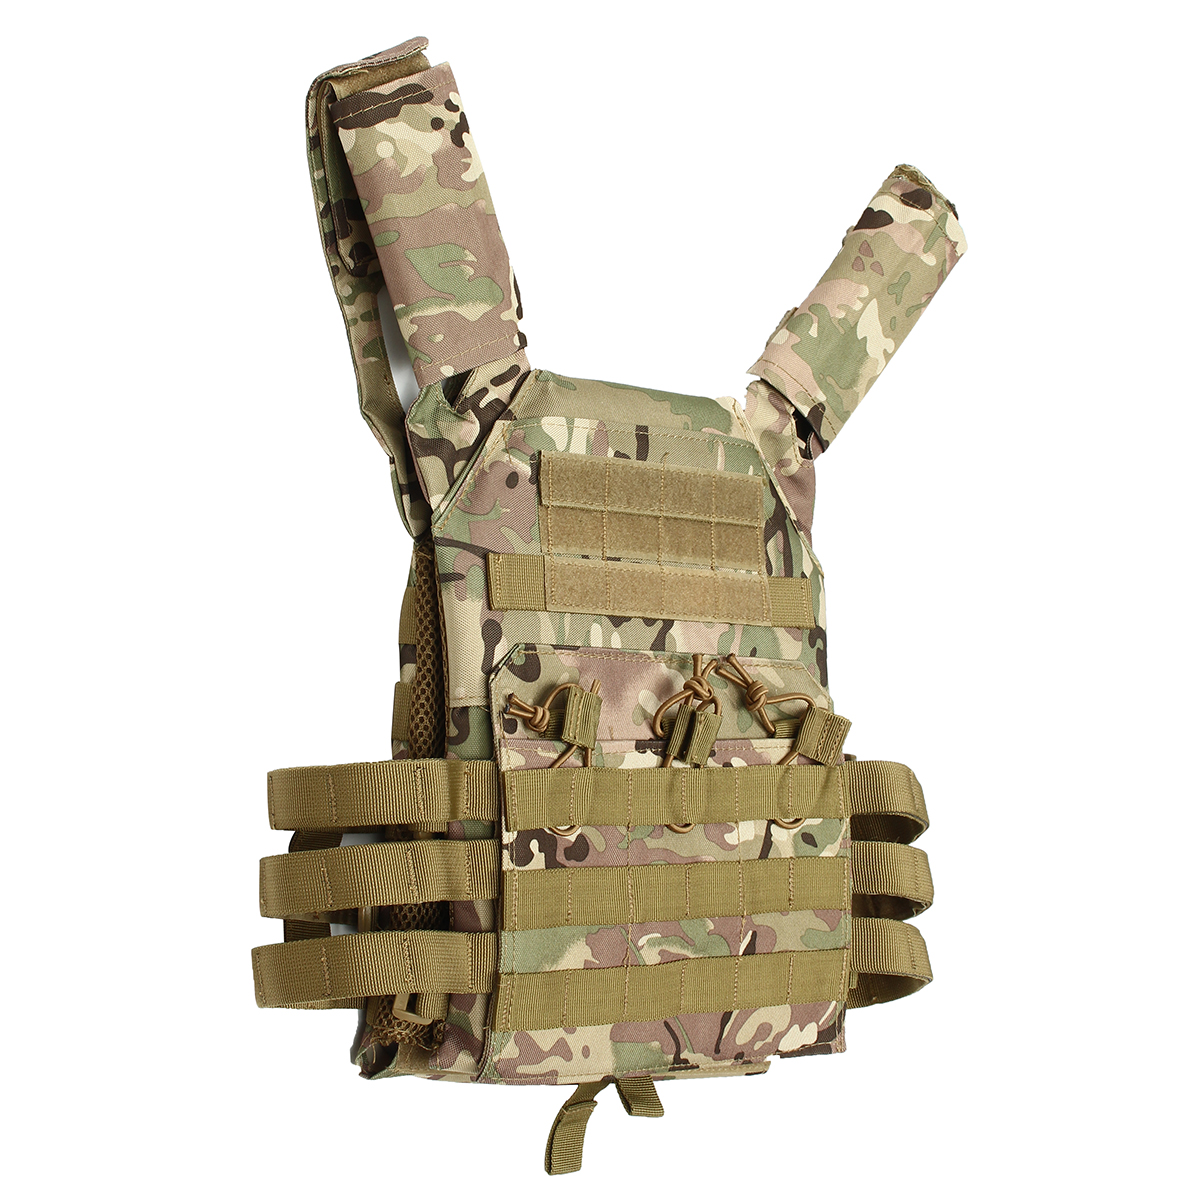 Outdoor-Molle-System-Tactical-Vest-Ultra-Light-Breathable-Adjustable-Armor-Plate-Vest-with-Pouches-1691276-4